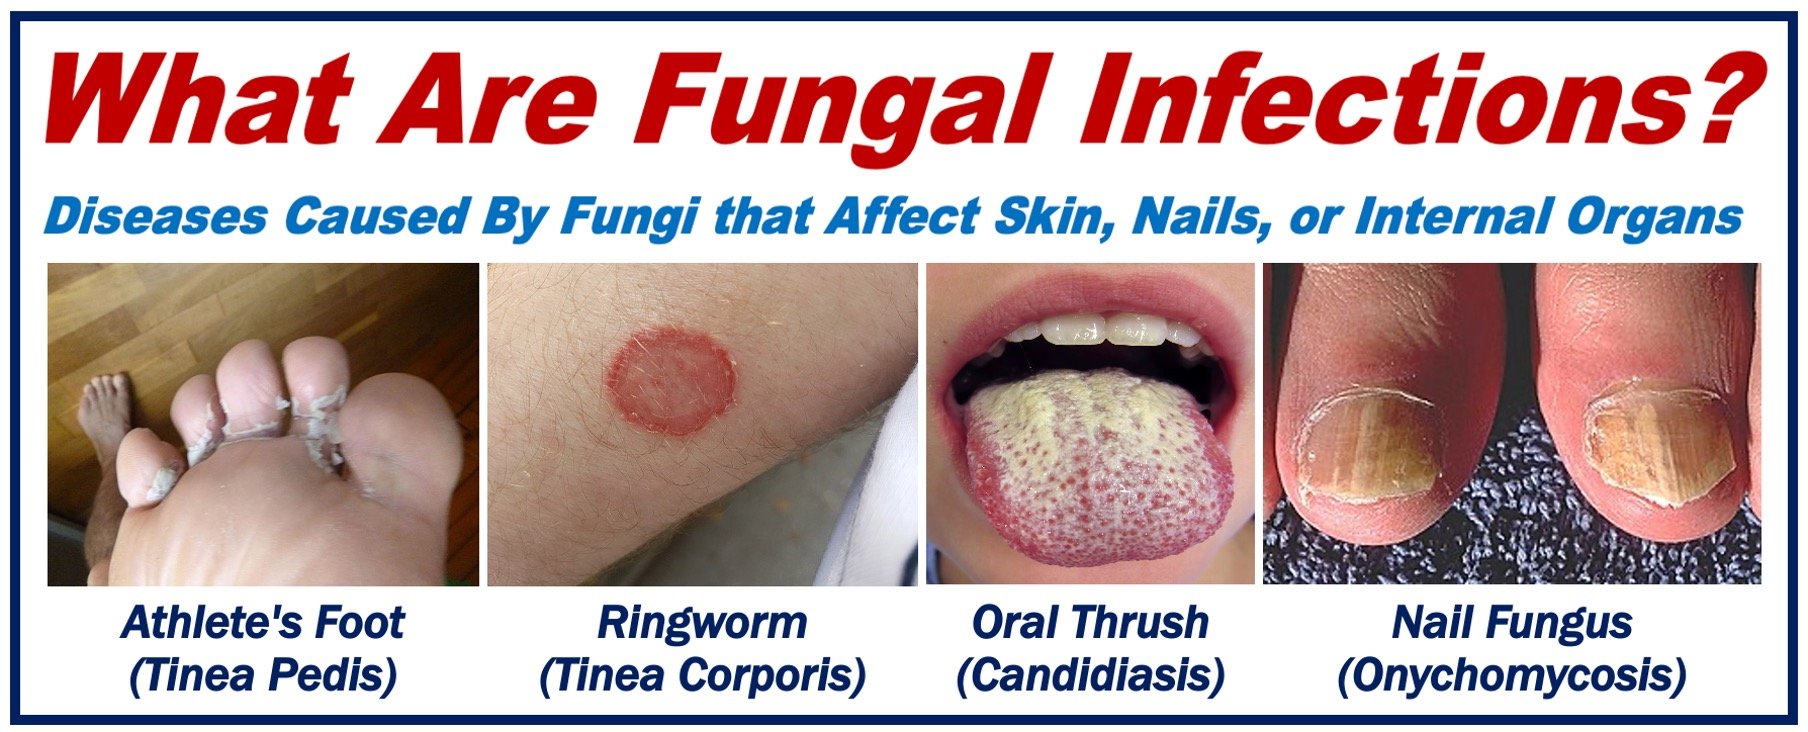 4 photos showing athlete's foot, ringworm, oral thrush, and nail fungus. Article about fungal infections